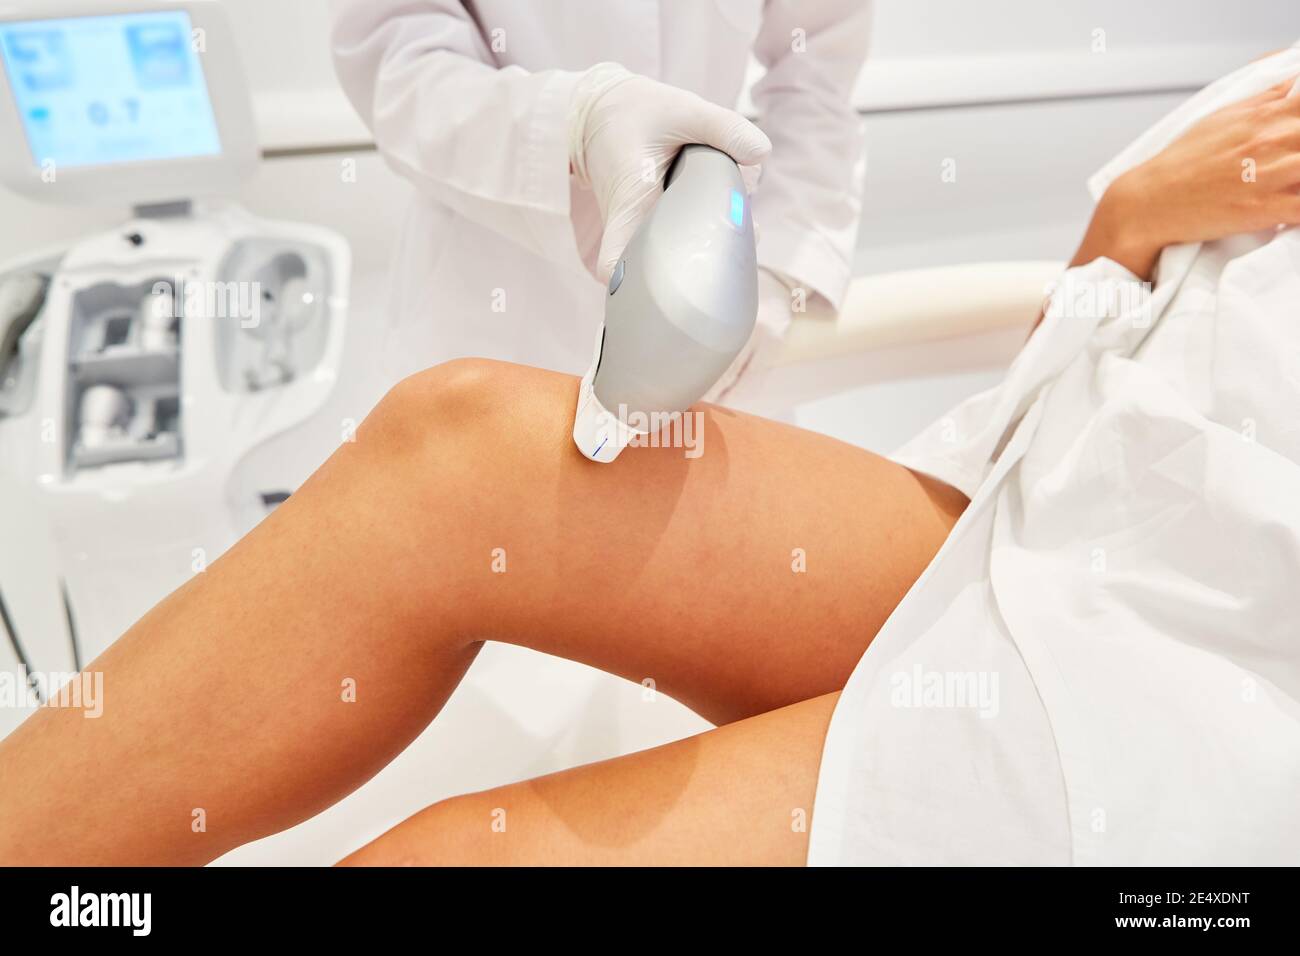 Dermatologist using Ultraformer to tighten the skin on the thigh to prevent stretch marks Stock Photo